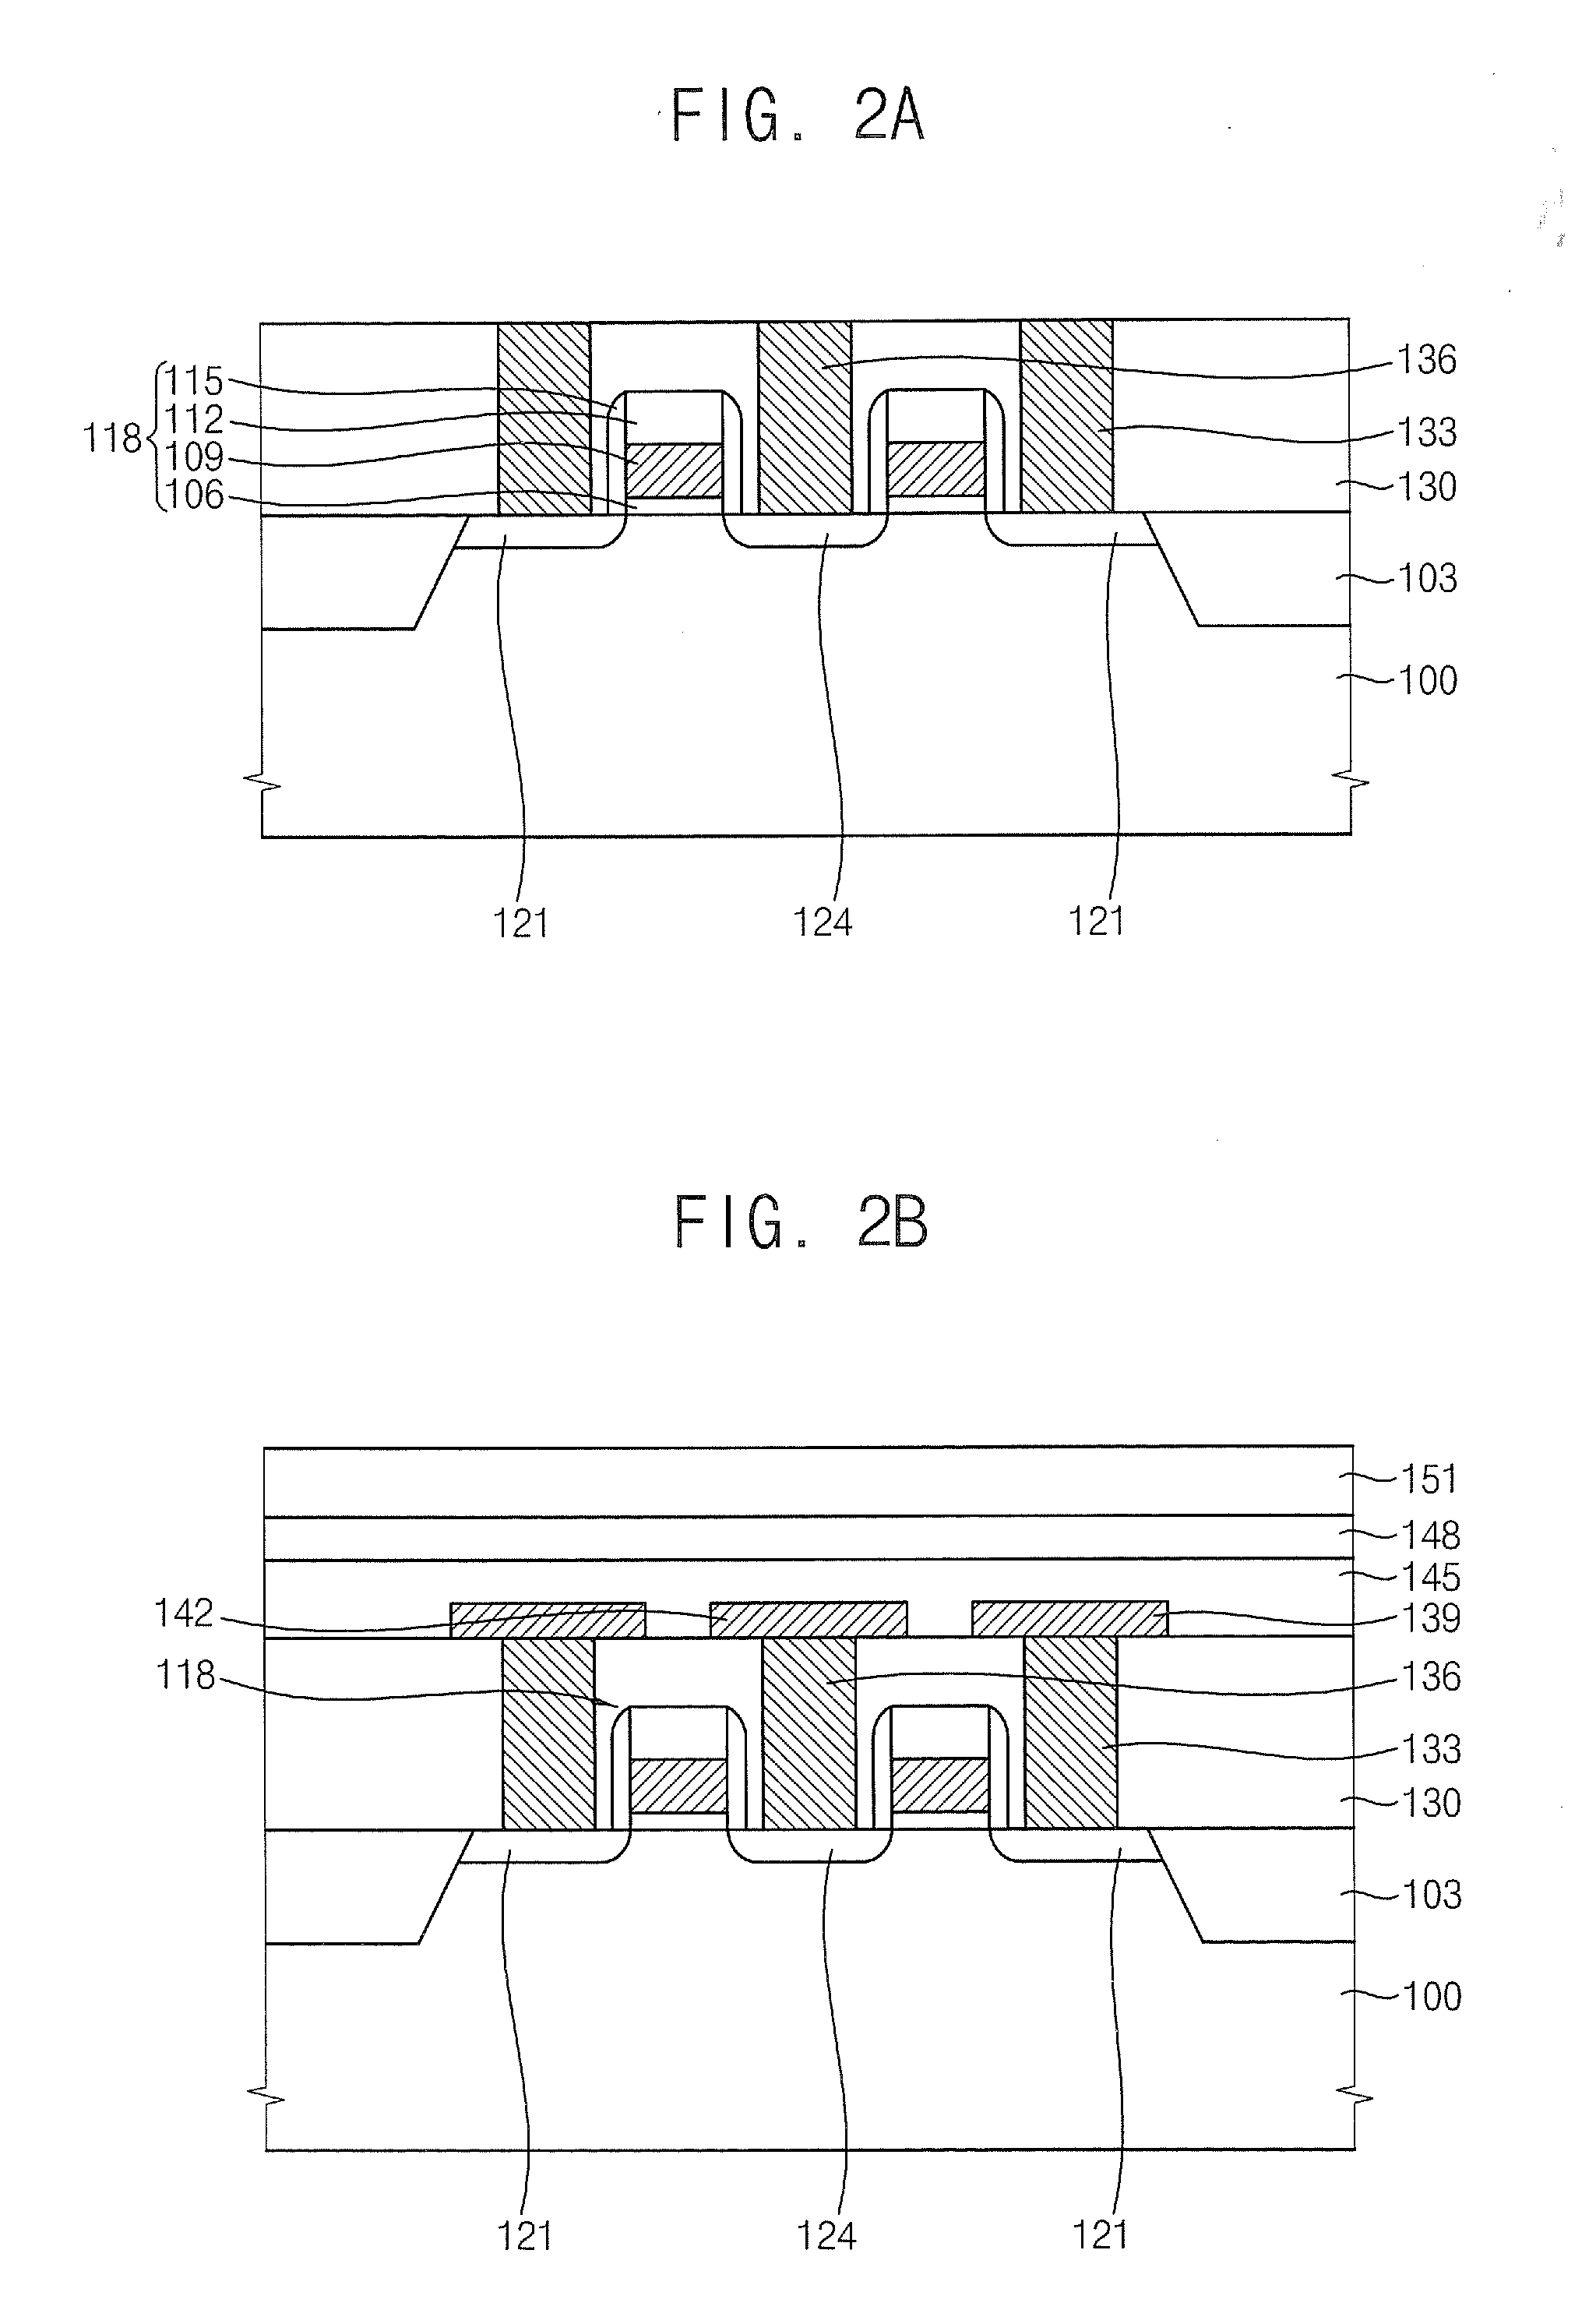 Chalcogenide Compound Target, Method of Forming the Chalcogenide Compound Target and Method for Manufacturing a Phase-Change Memory Device